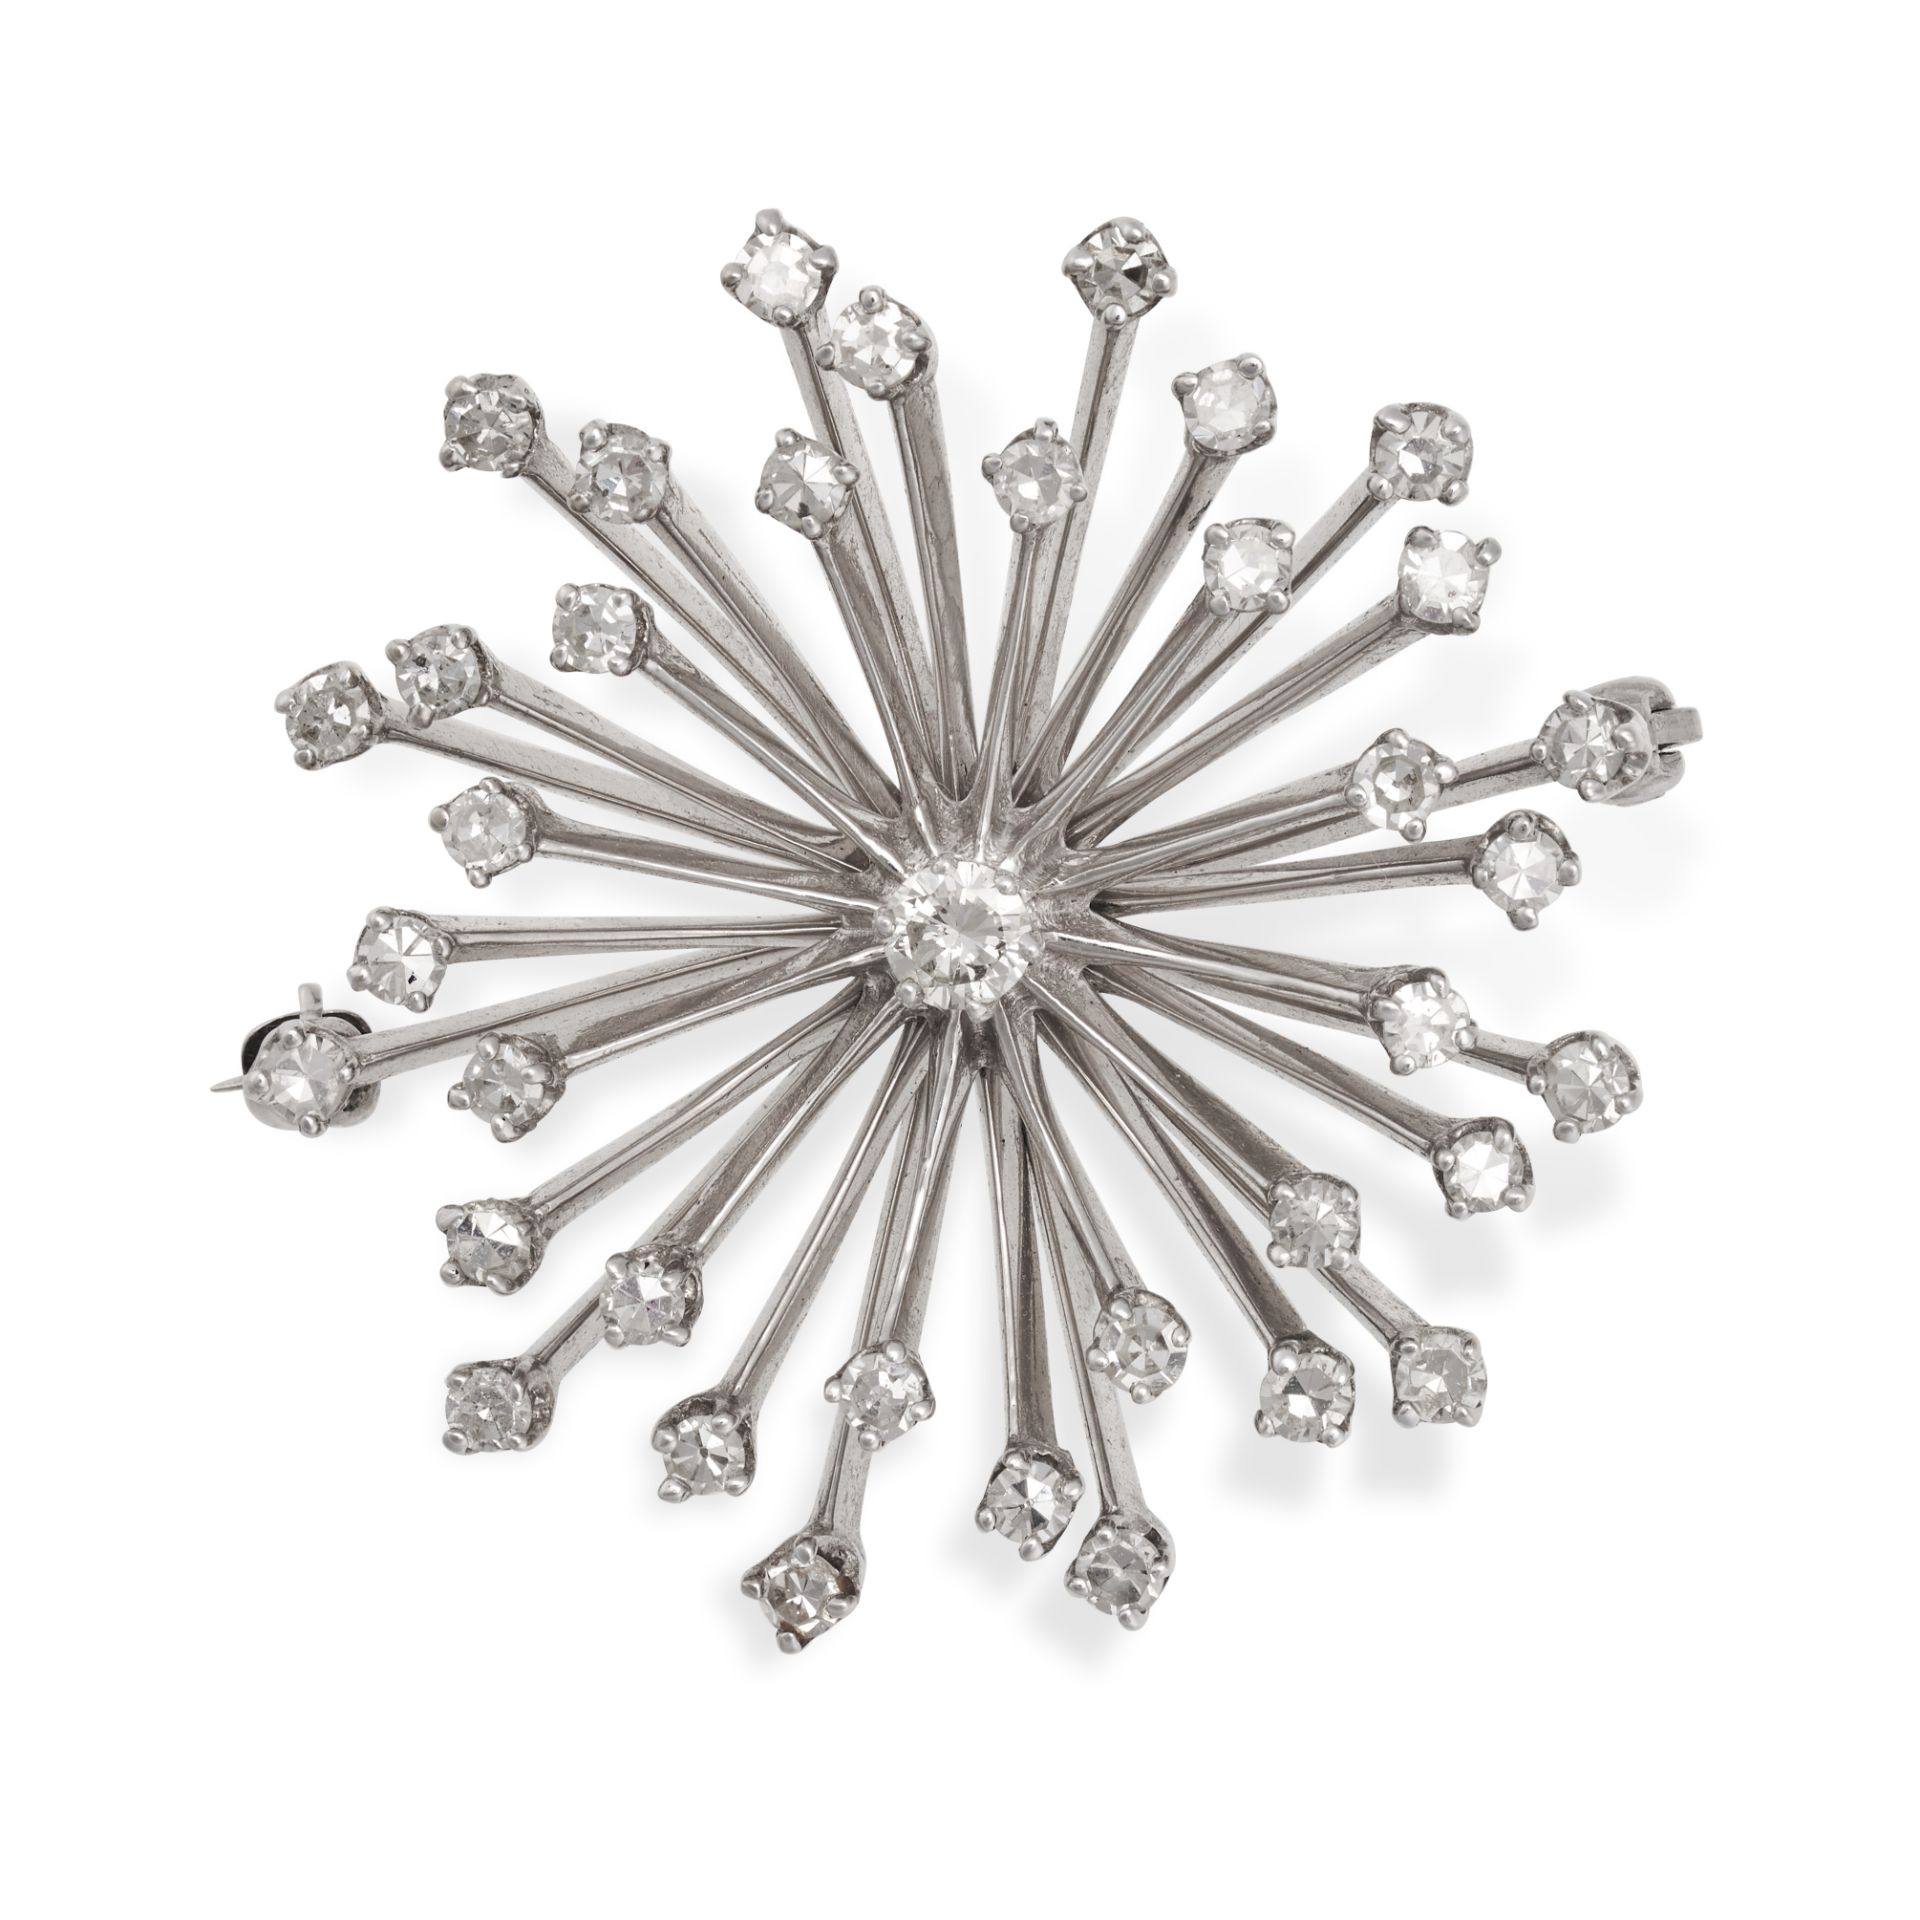 A VINTAGE DIAMOND SUNBURST BROOCH in white gold, the body set throughout with round brilliant and...